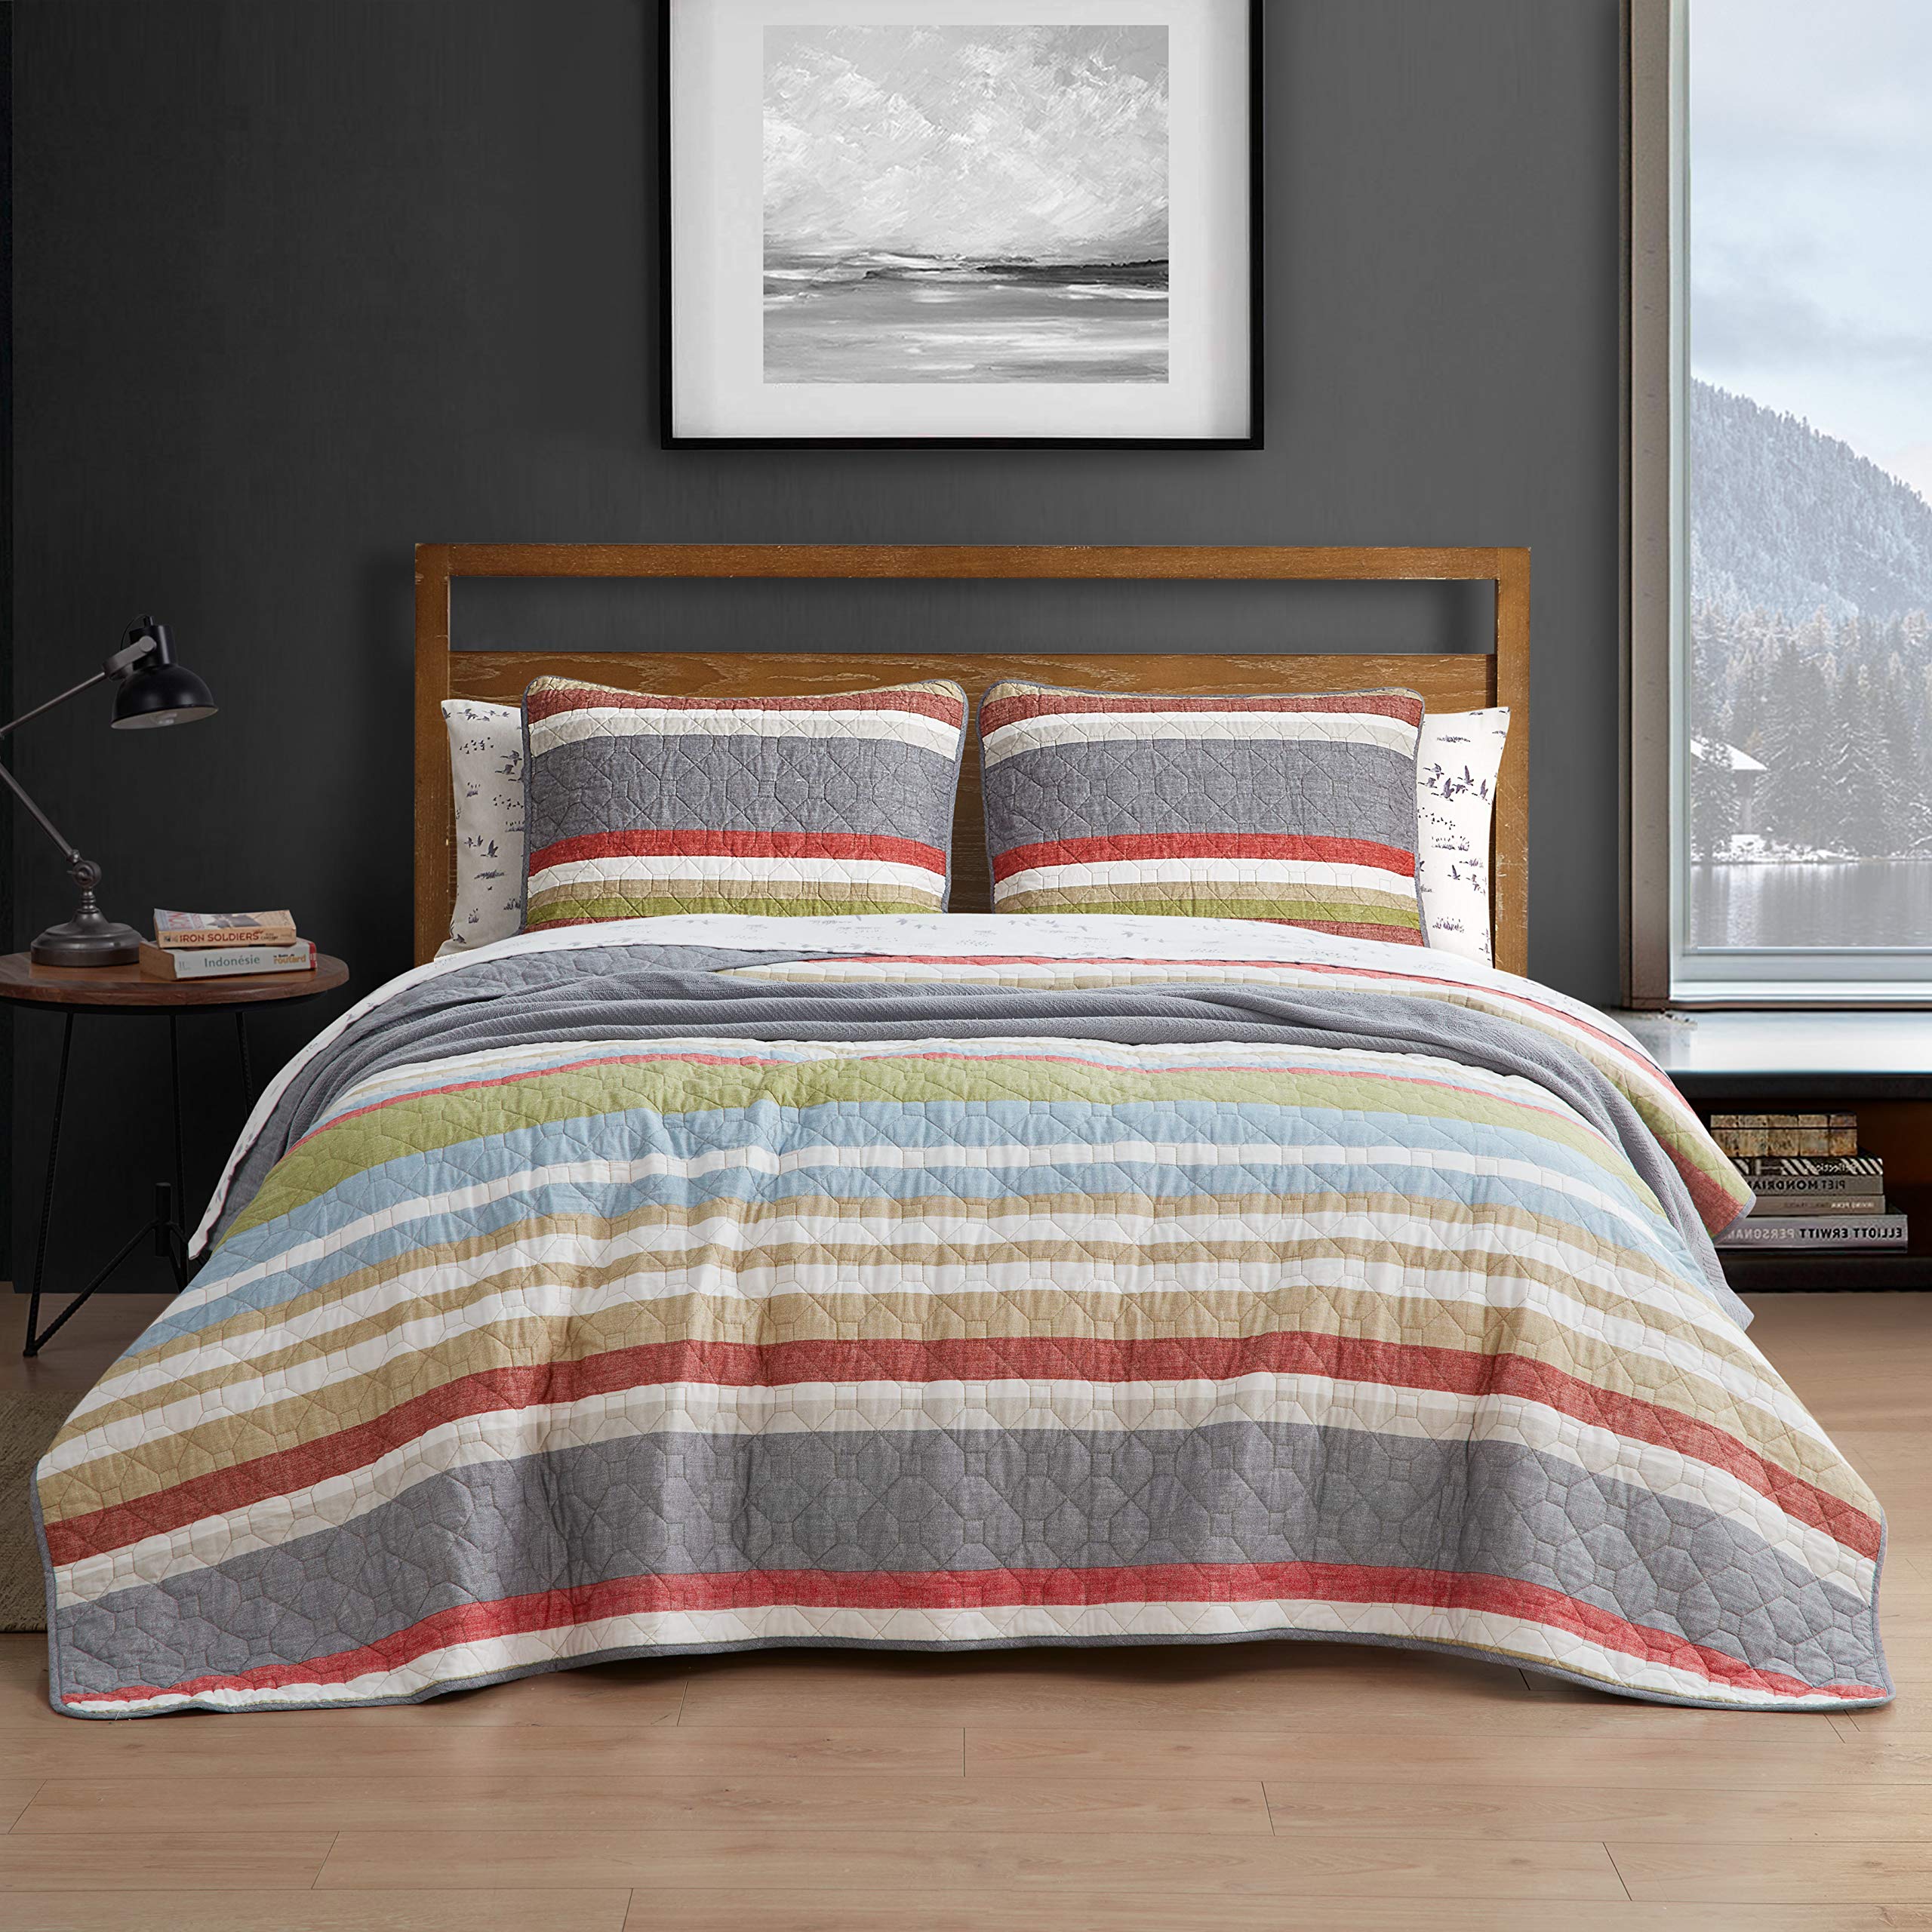 Book Cover Eddie Bauer - Quilt Set, Cotton Reversible Bedding with Matching Shams, Lightweight Home Decor for All Seasons (Salmon Ladder Multi, King) Salmon Ladder Multi King